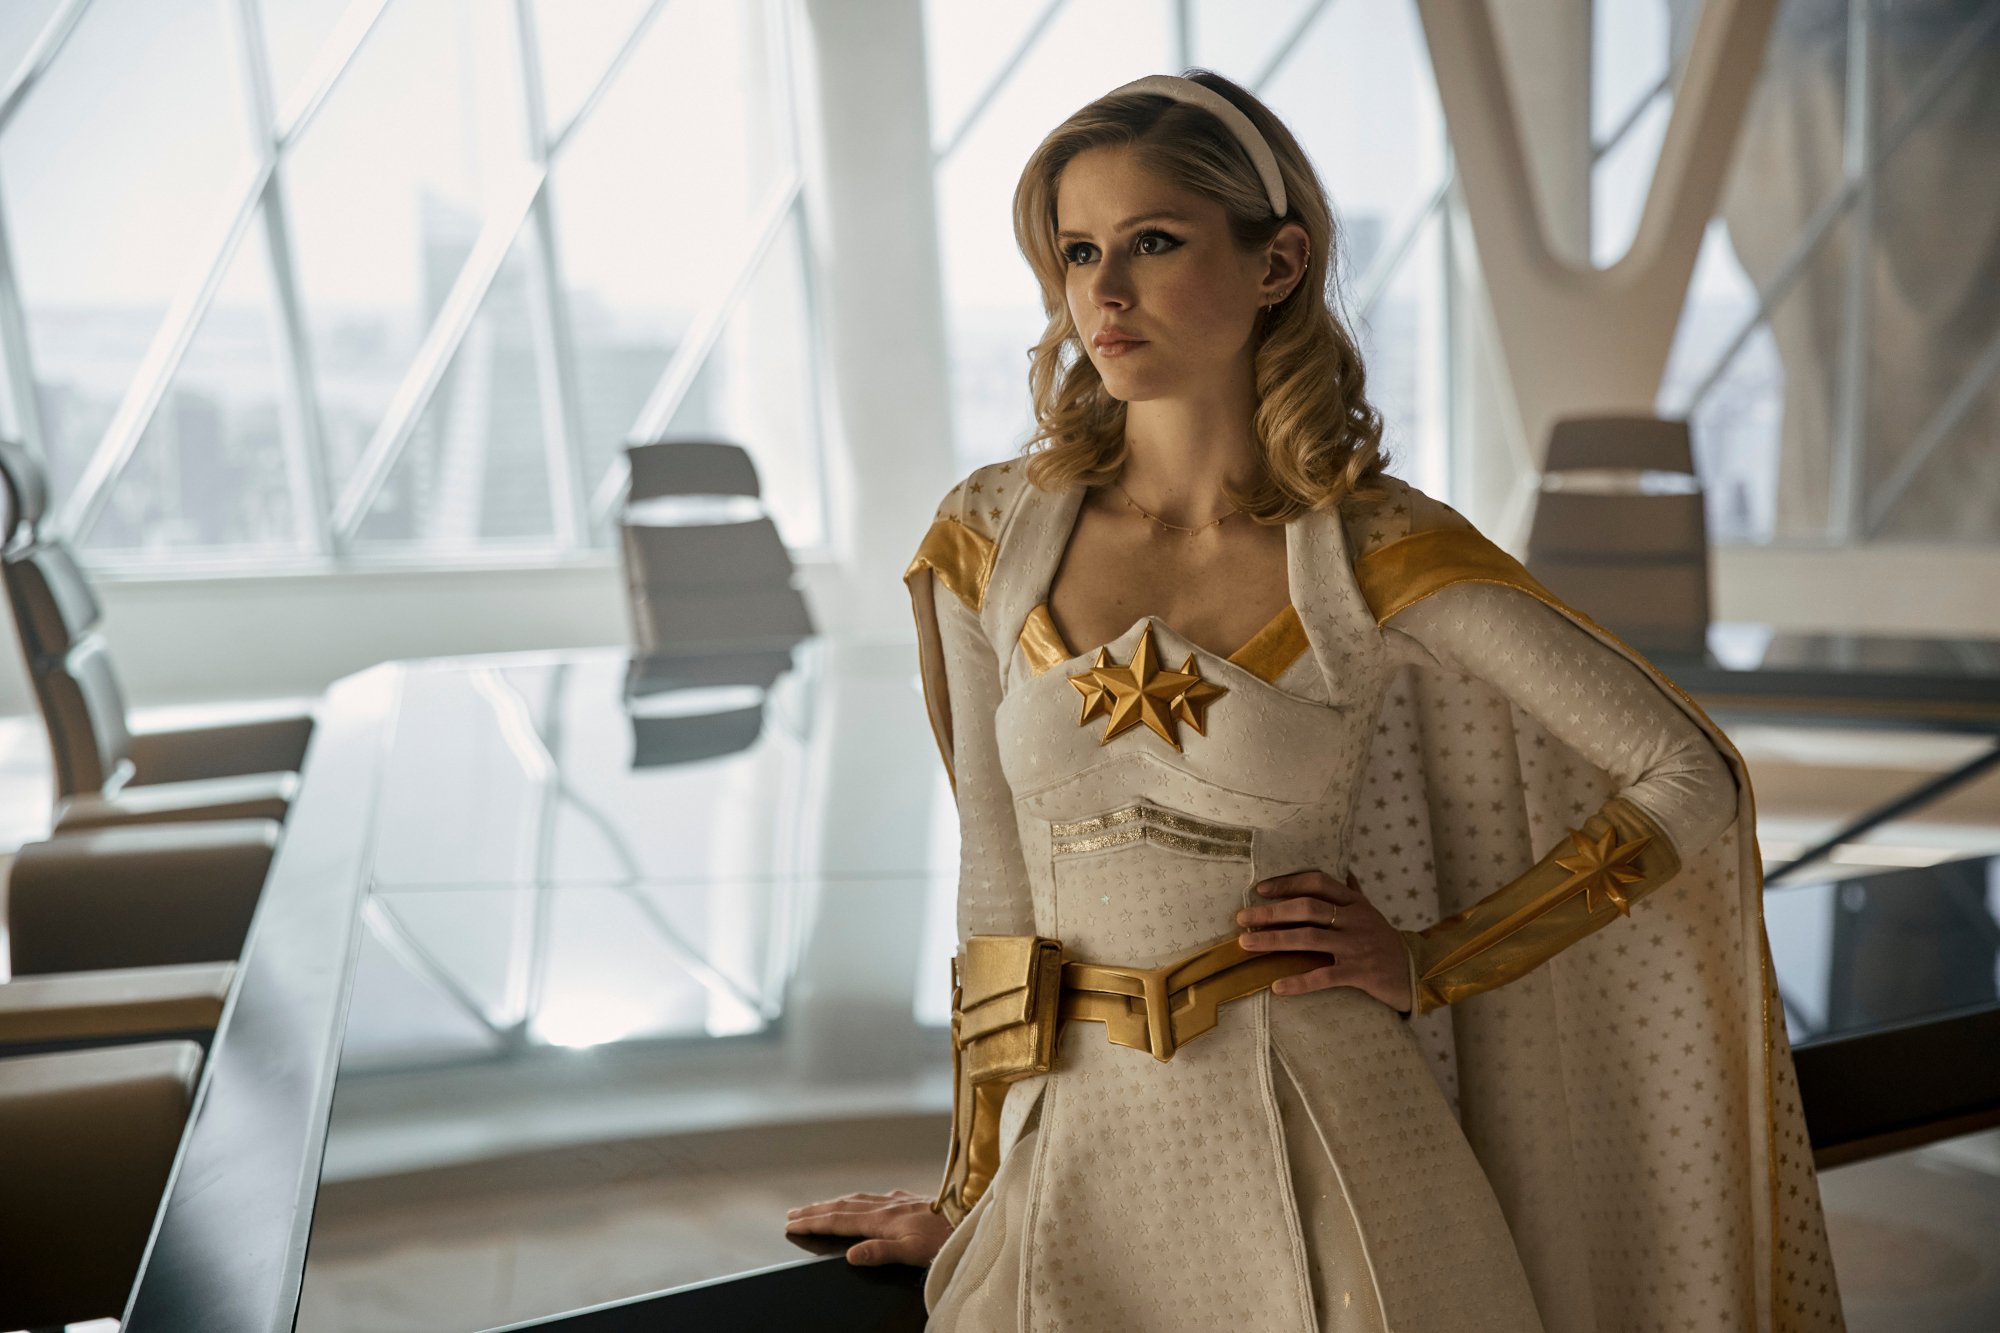 Erin Moriarty in 'The Boys' Season 3, which just streamed its Herogasm episode. She's wearing her white and gold costume and leaning against a table with her hand on her hip.